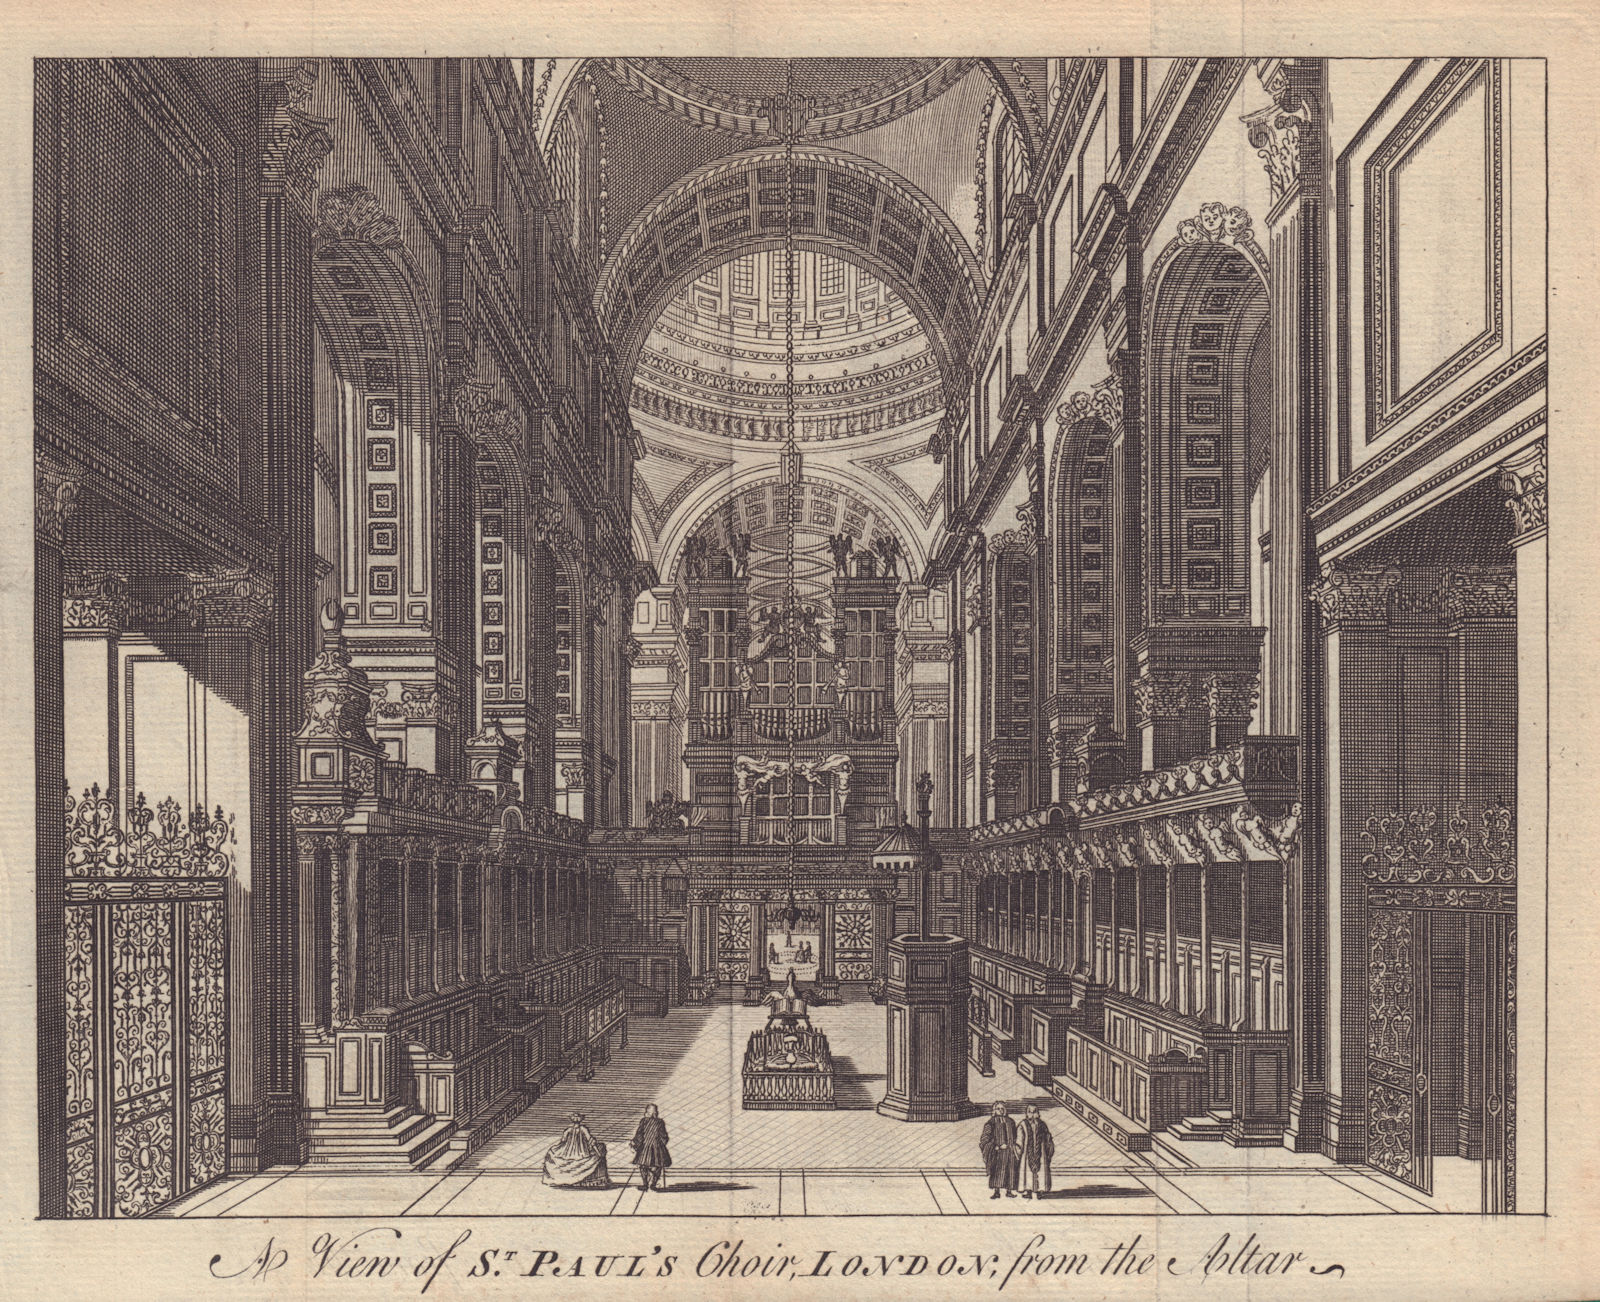 Associate Product A View of St. Paul's Choir [Cathedral], London, from the Altar. Cathedral 1750